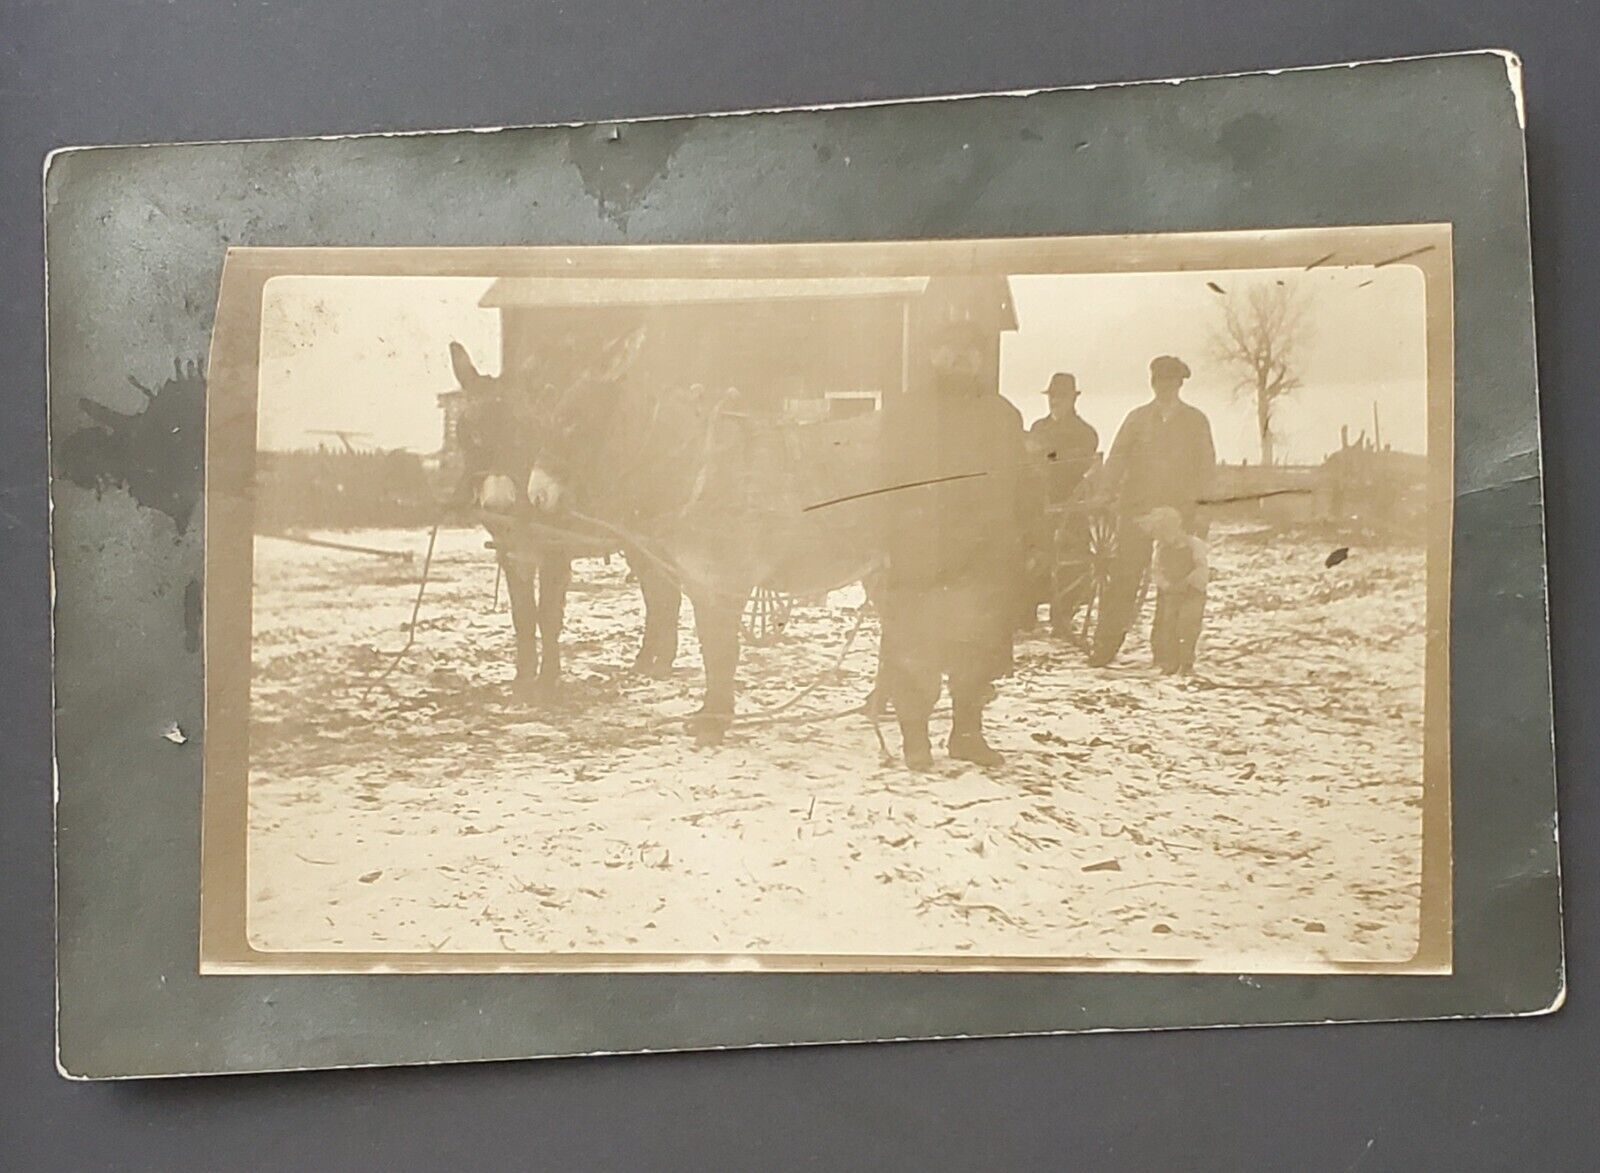 RPPC three Men A Boy and two Mules Snow on Ground Barn Unposted Unidentifiable